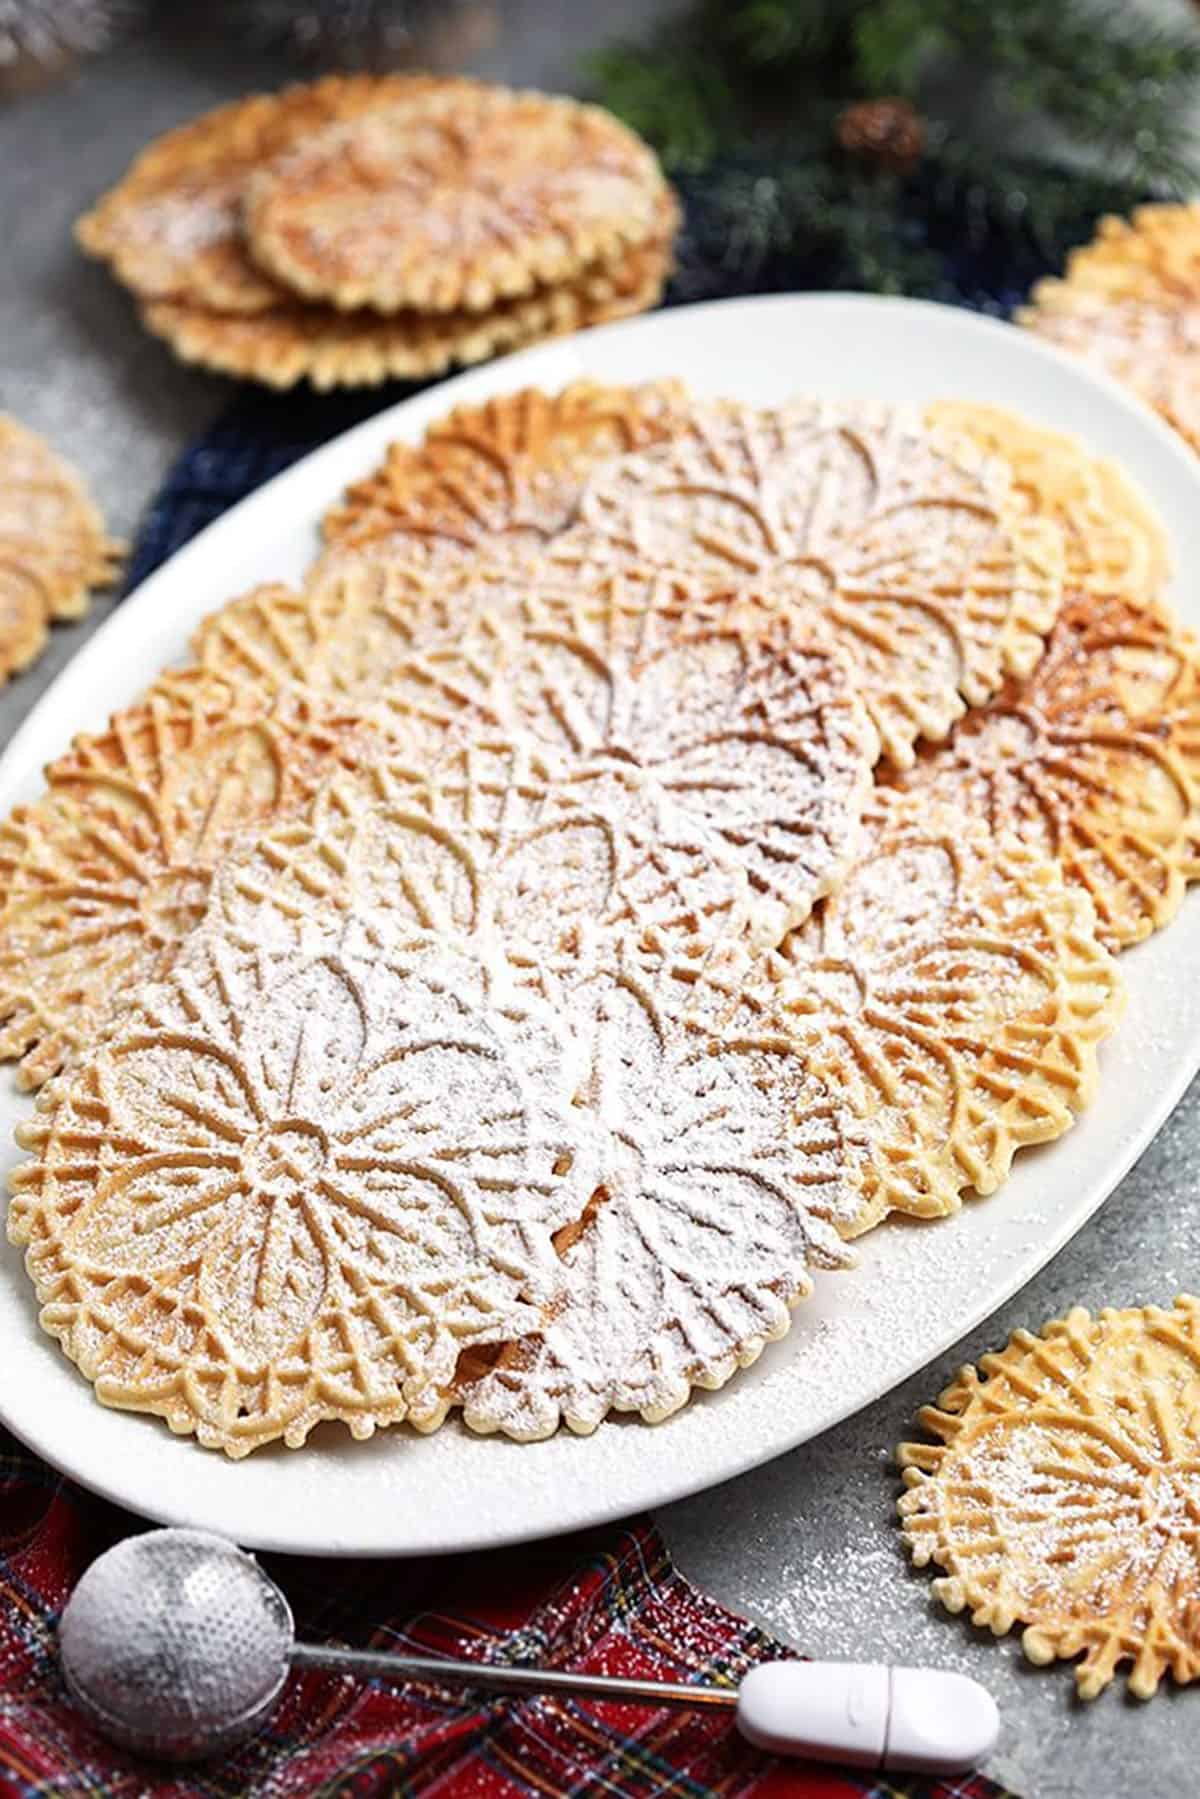 Platter of pizzelles on a white platter with a sugar wand on a plaid napkin.